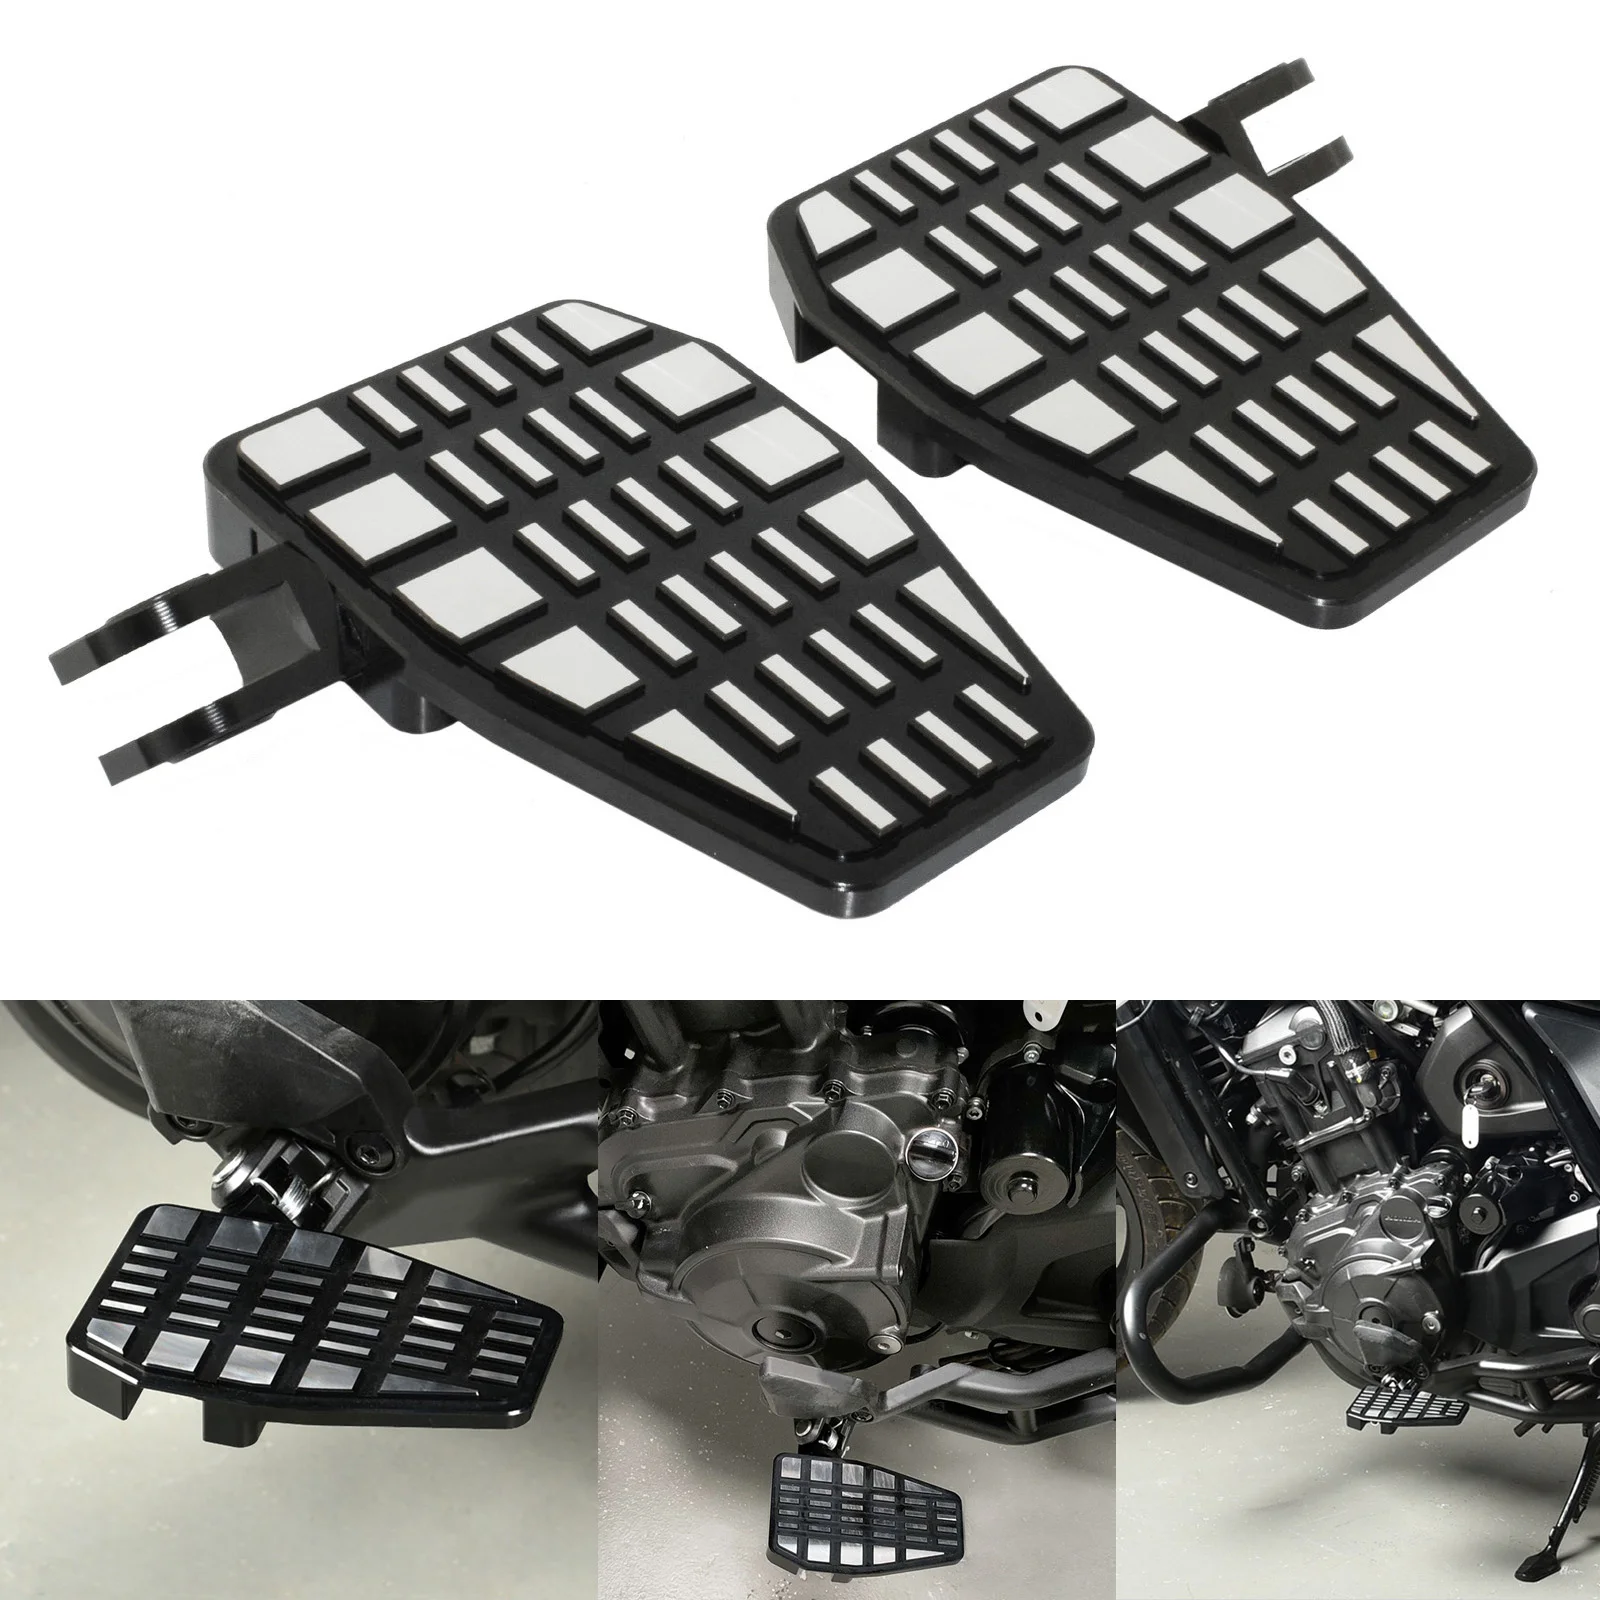 waase Black Motorcycle Parts Driver Footrests Foot Rest Footboard Pegs Wide Pedals For HONDA Rebel 1100 CMX1100 SC83 2021 2022